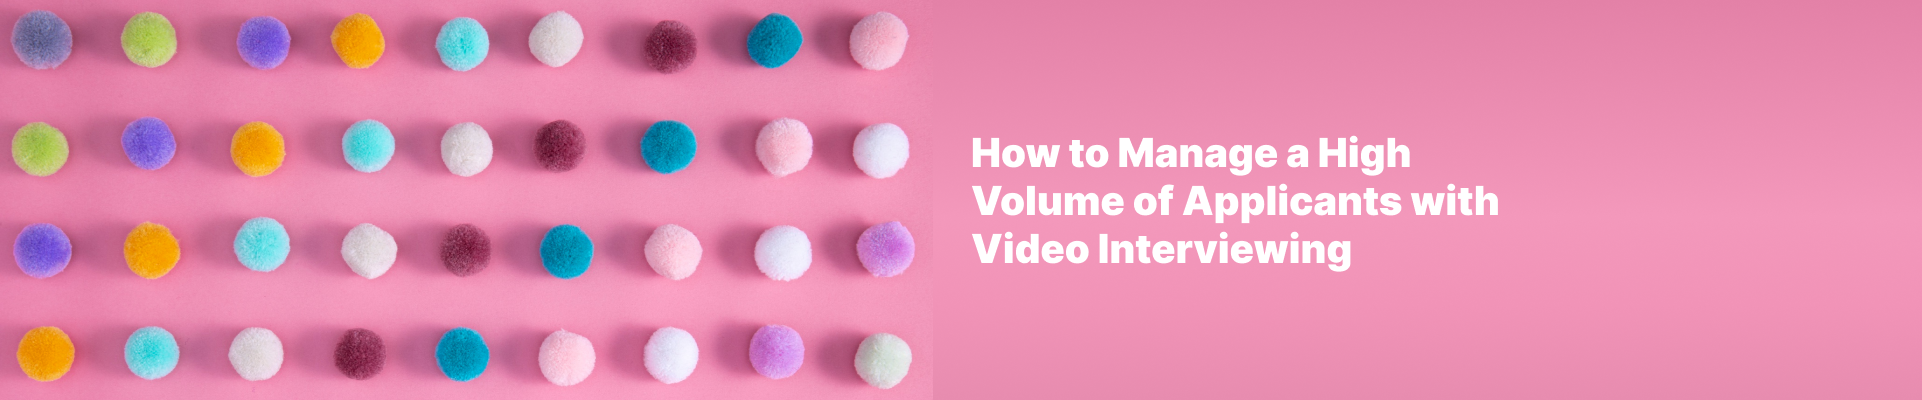 How to Manage a High Volume of Applicants with Video Interviewing